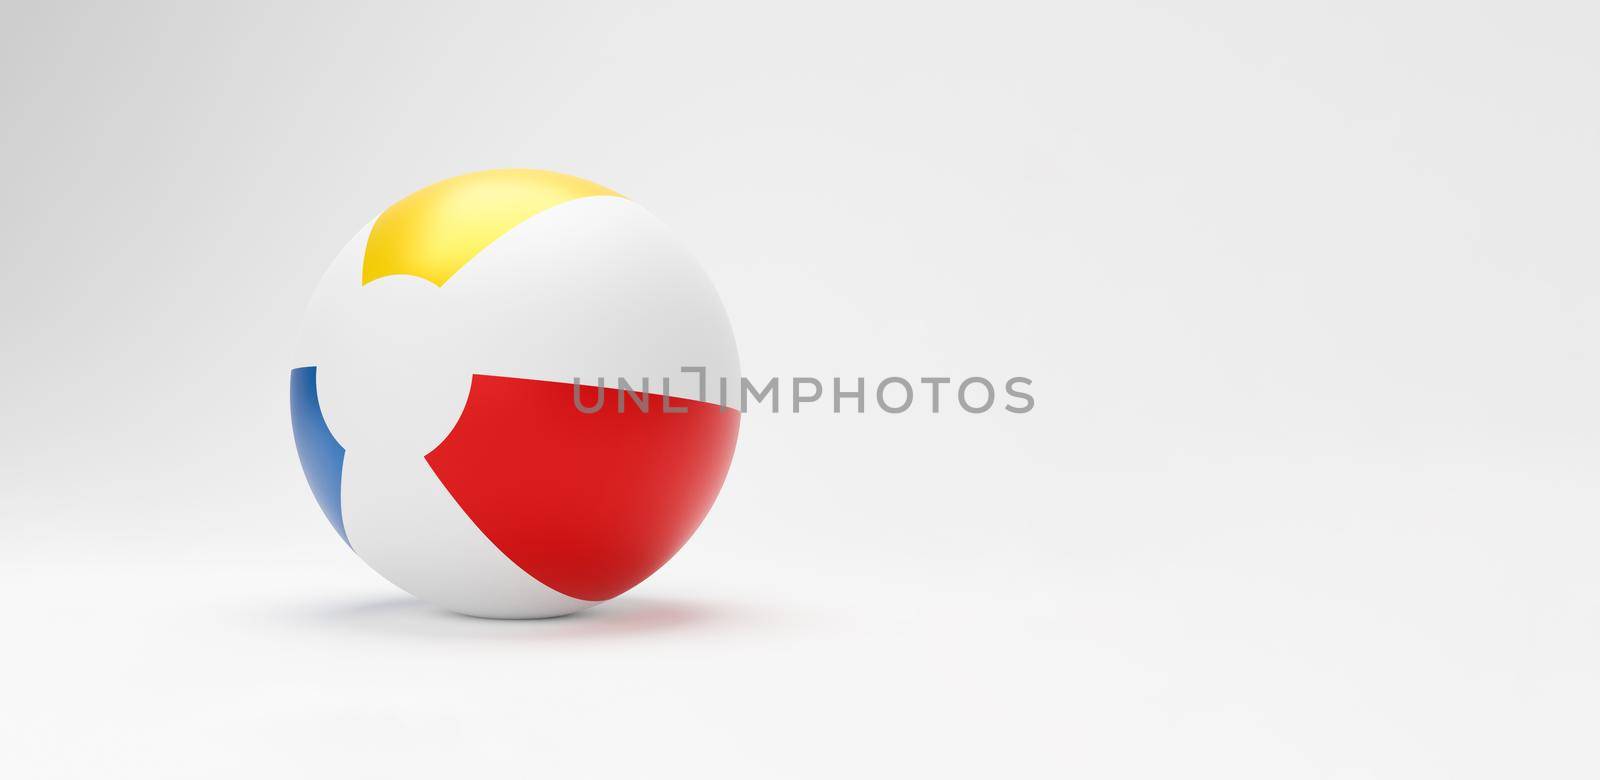 3d beach ball. Striped inflatable toy game beach ball isolated on background with copy space. summer vacation or beach symbol, 3D illustration